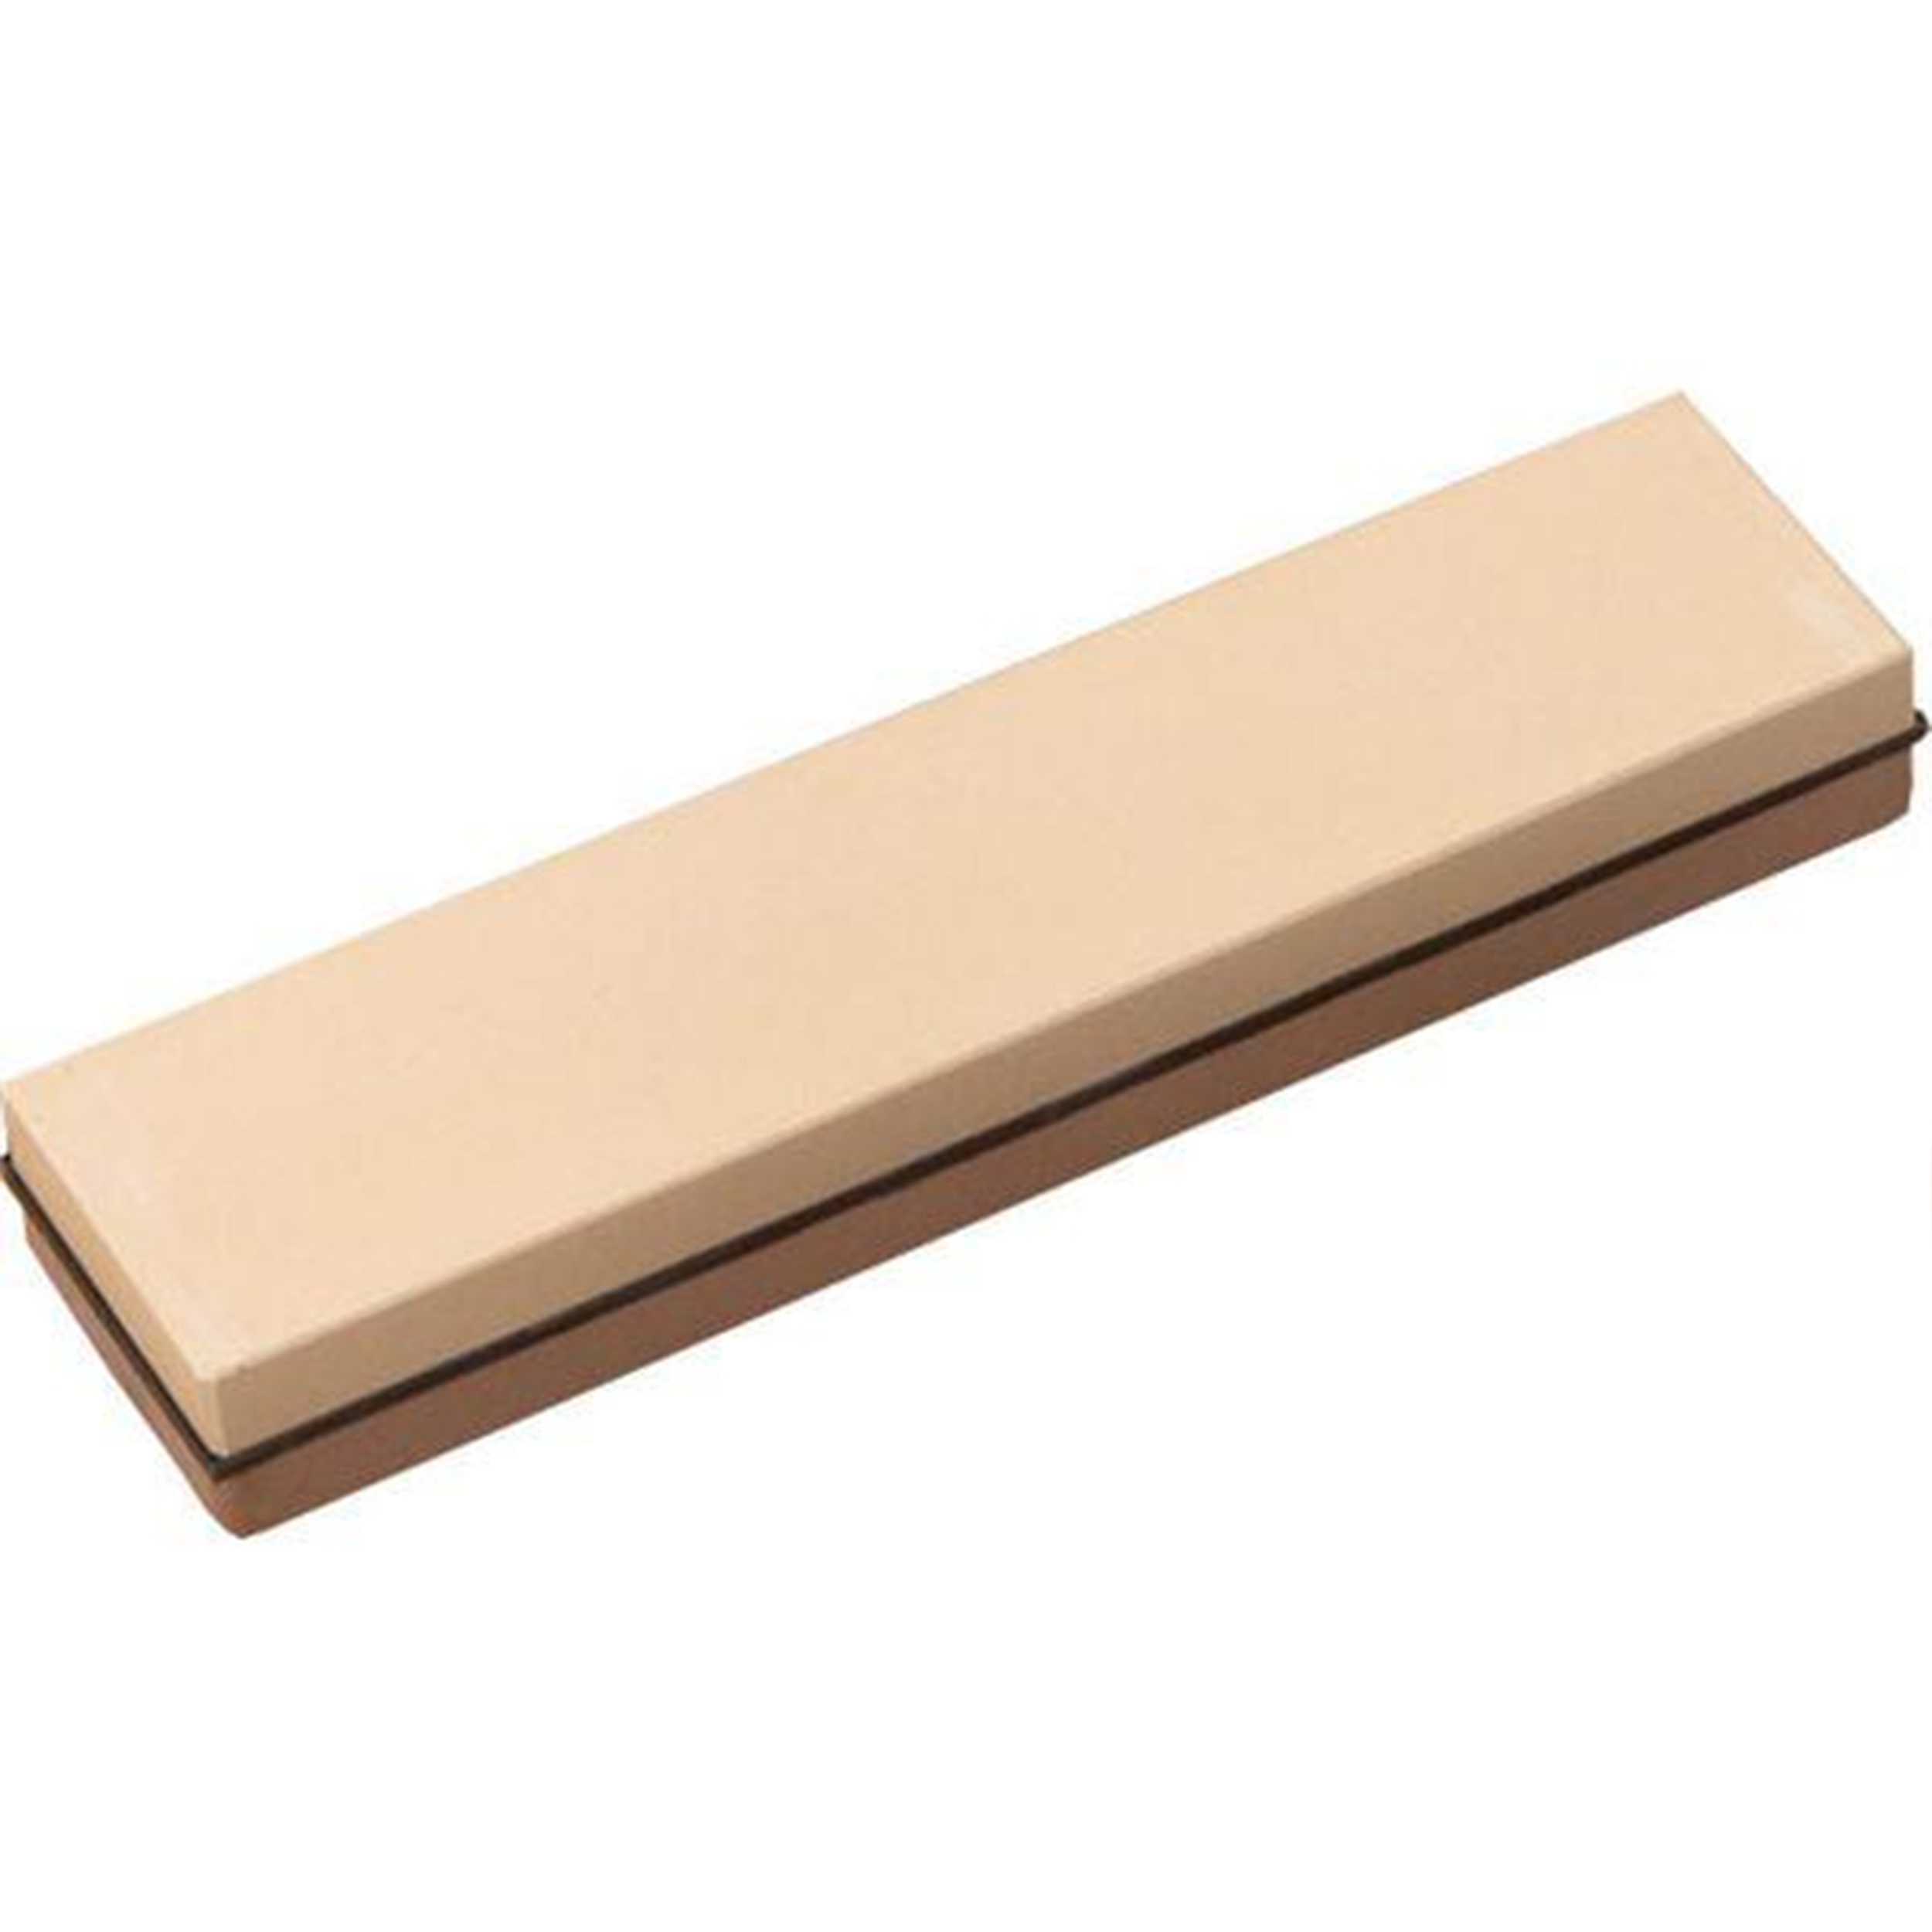 Combination Waterstone, 7-1/4" X 2-1/2" X 1", 1200/8000 Grit